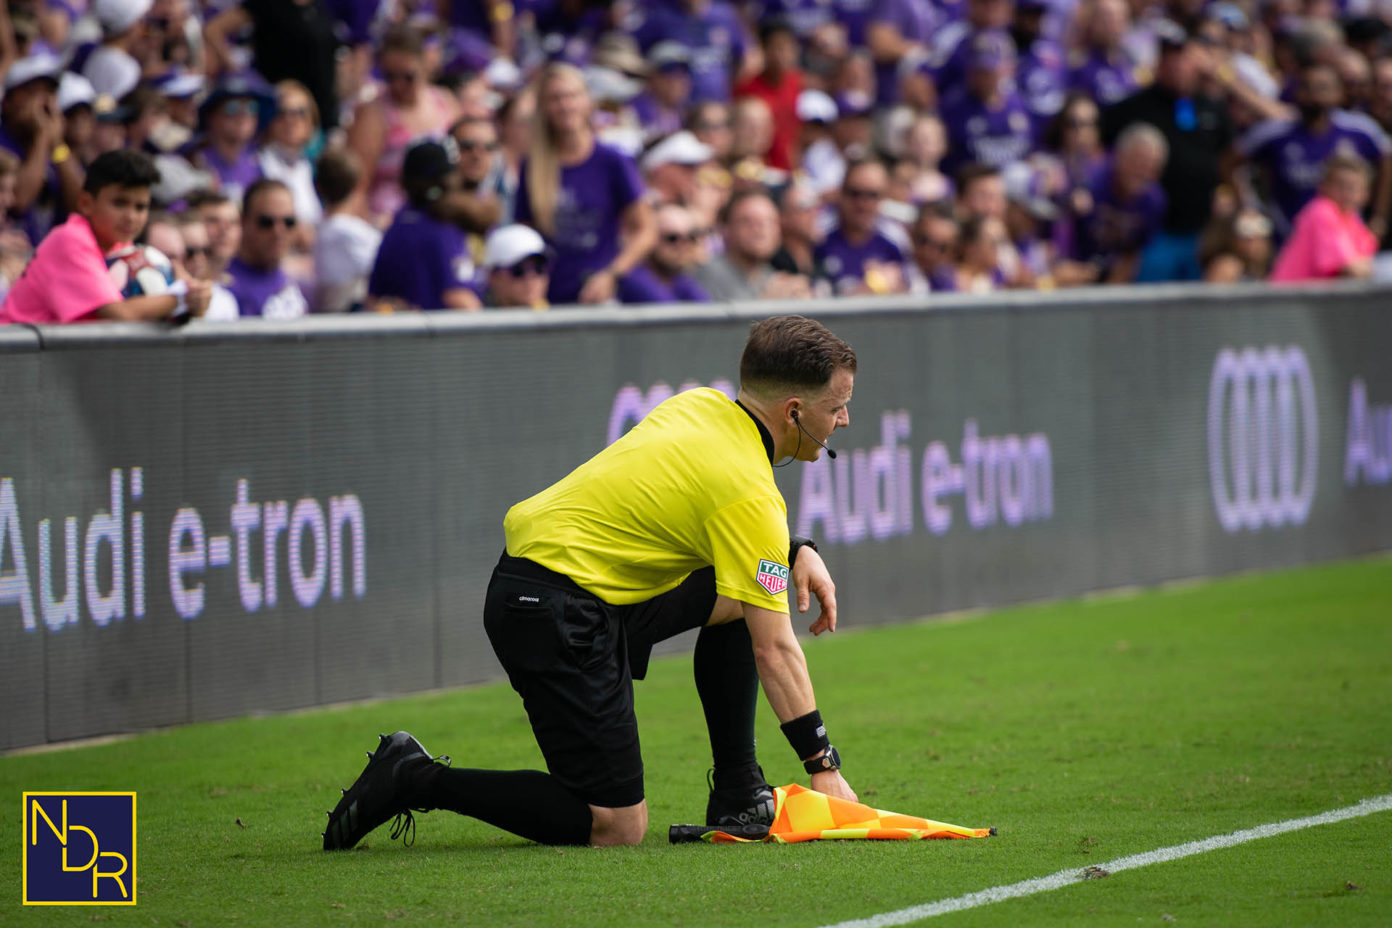 Photos | Match 1 - OCSC 2, NYCFC 2 — New Day Review